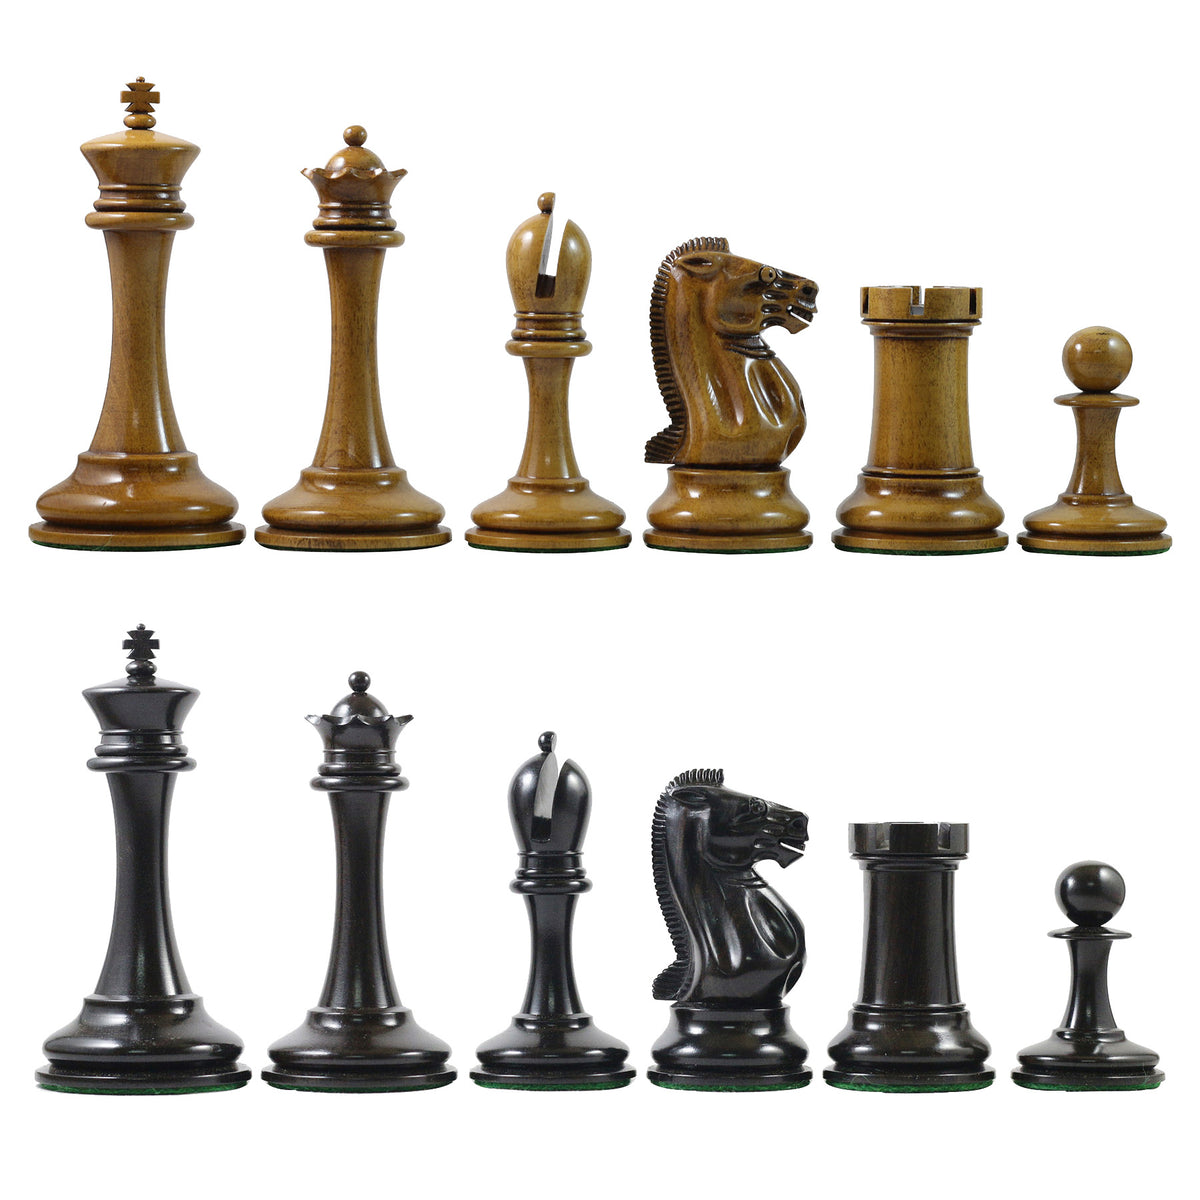 B & Company Reproduction Distressed Antiqued 4.4" Chess Pieces